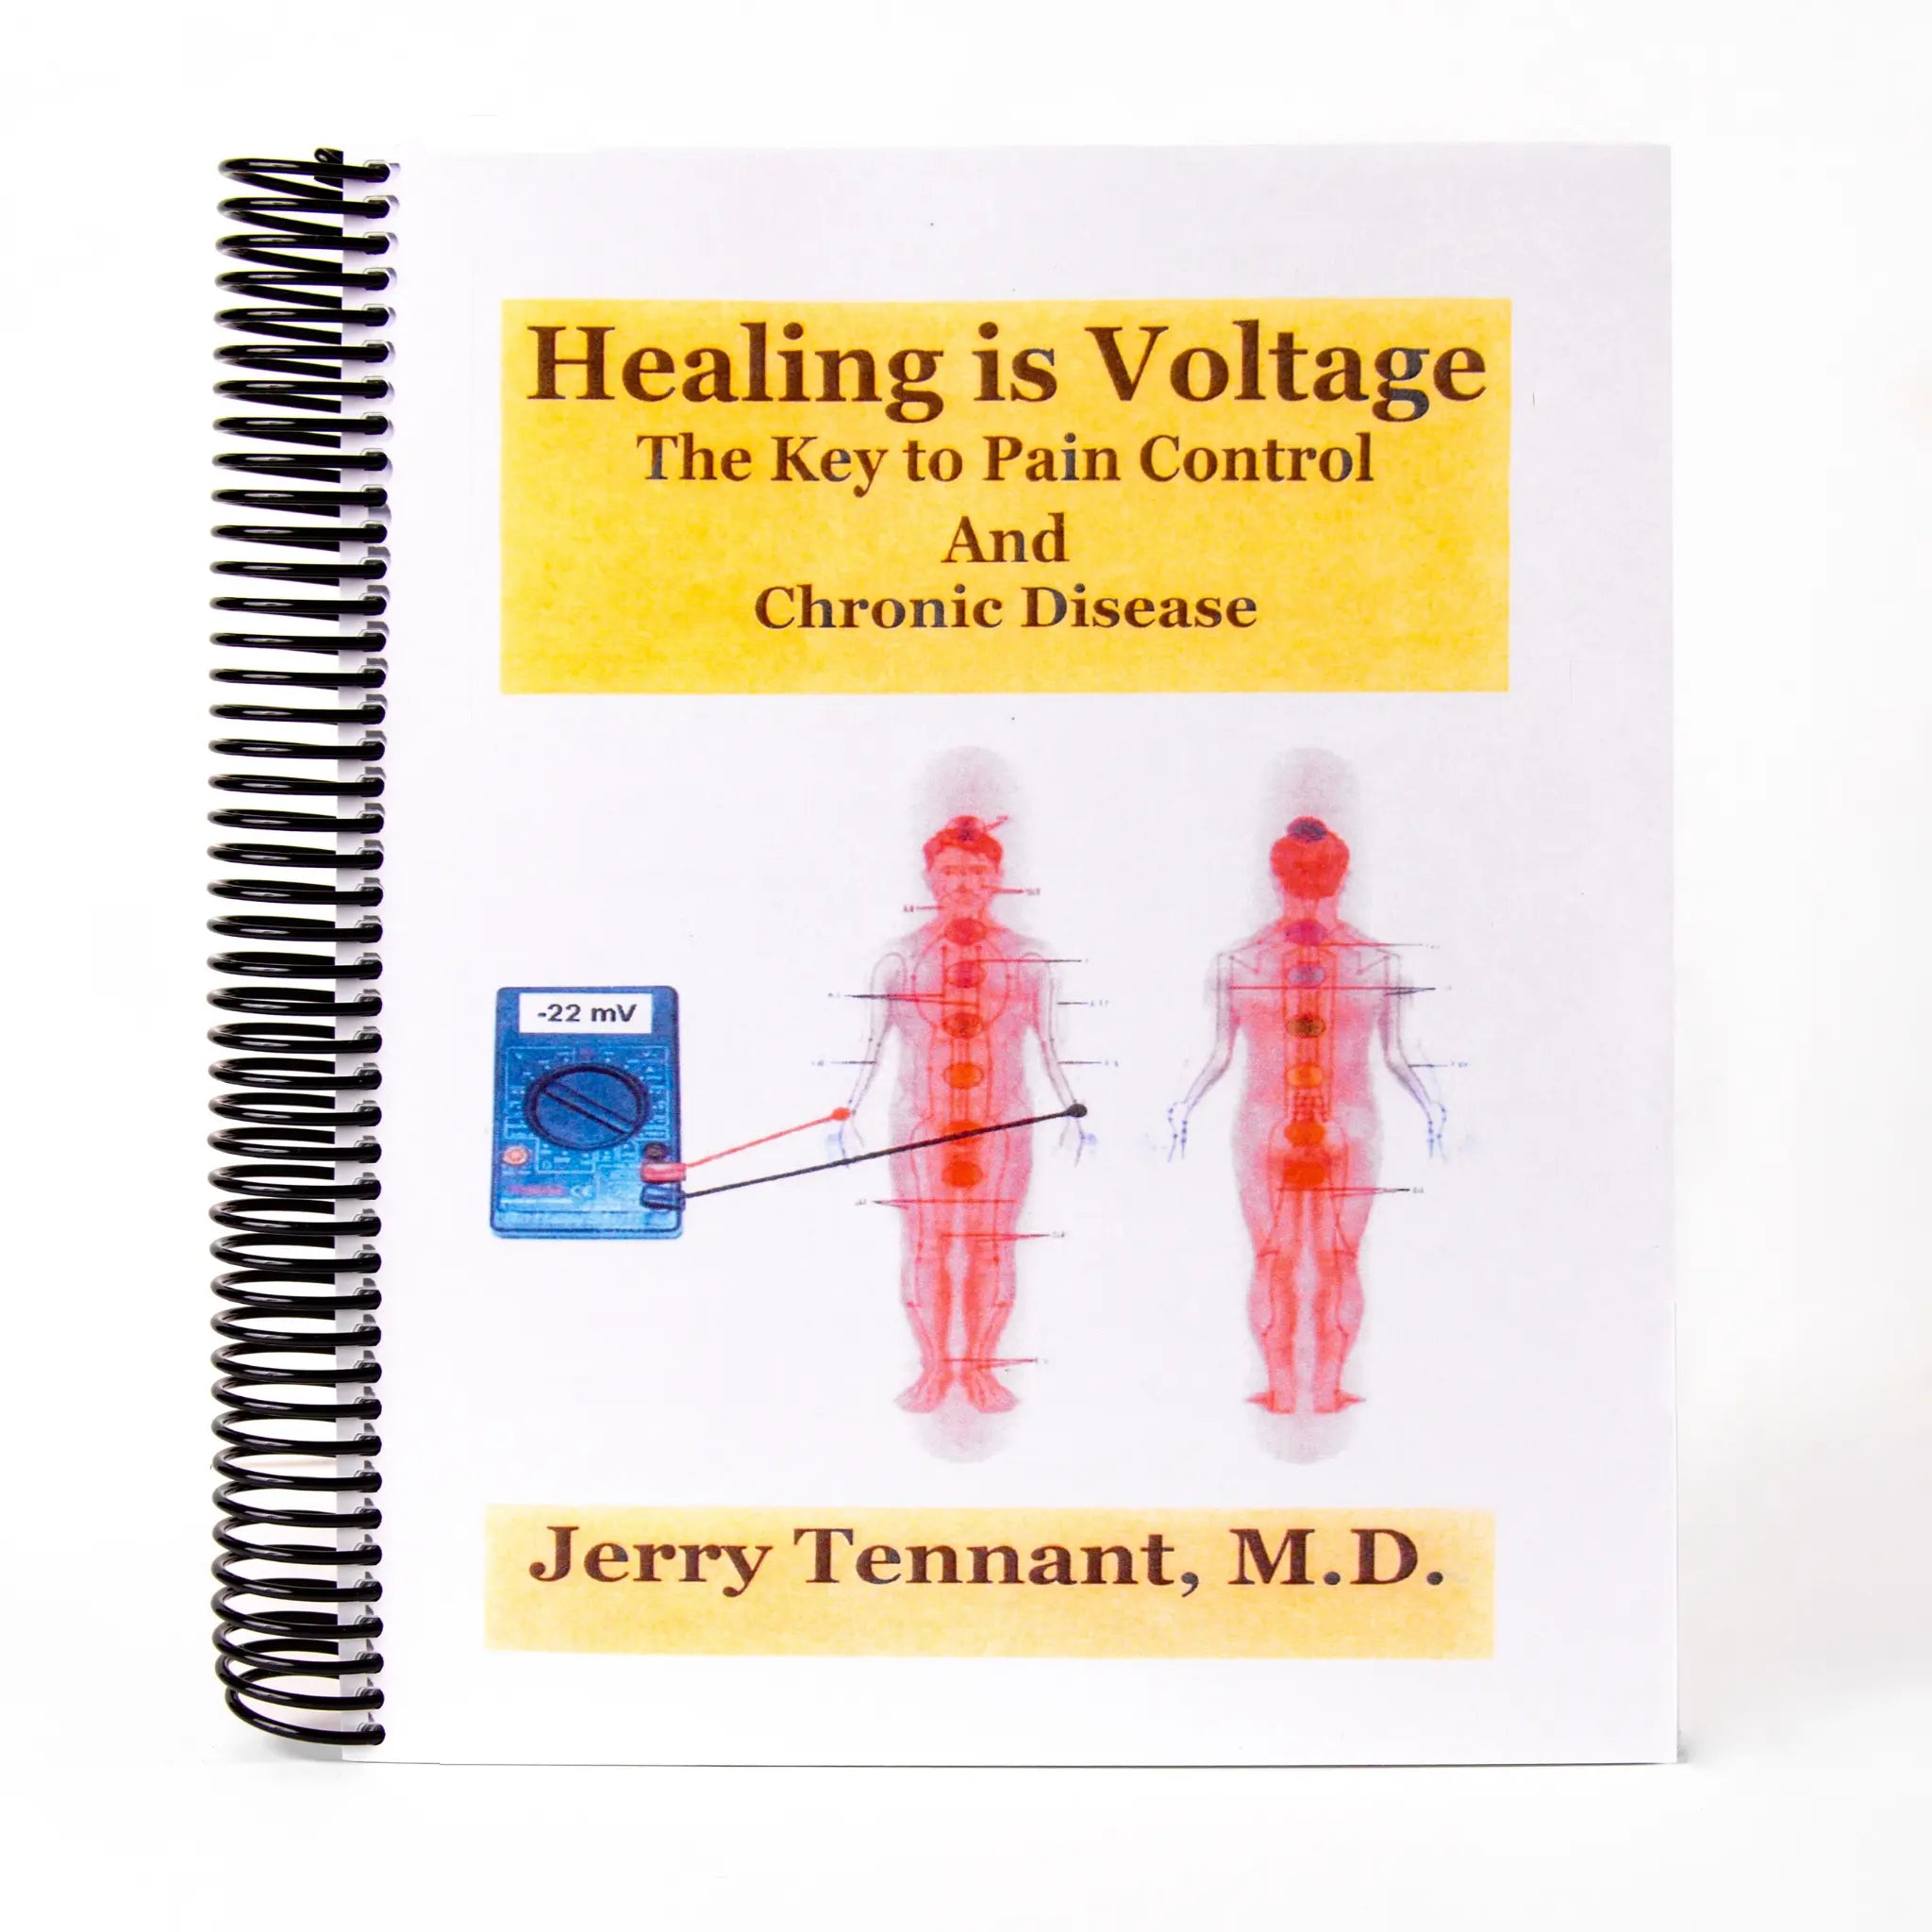 Healing is Voltage™ - The Textbook